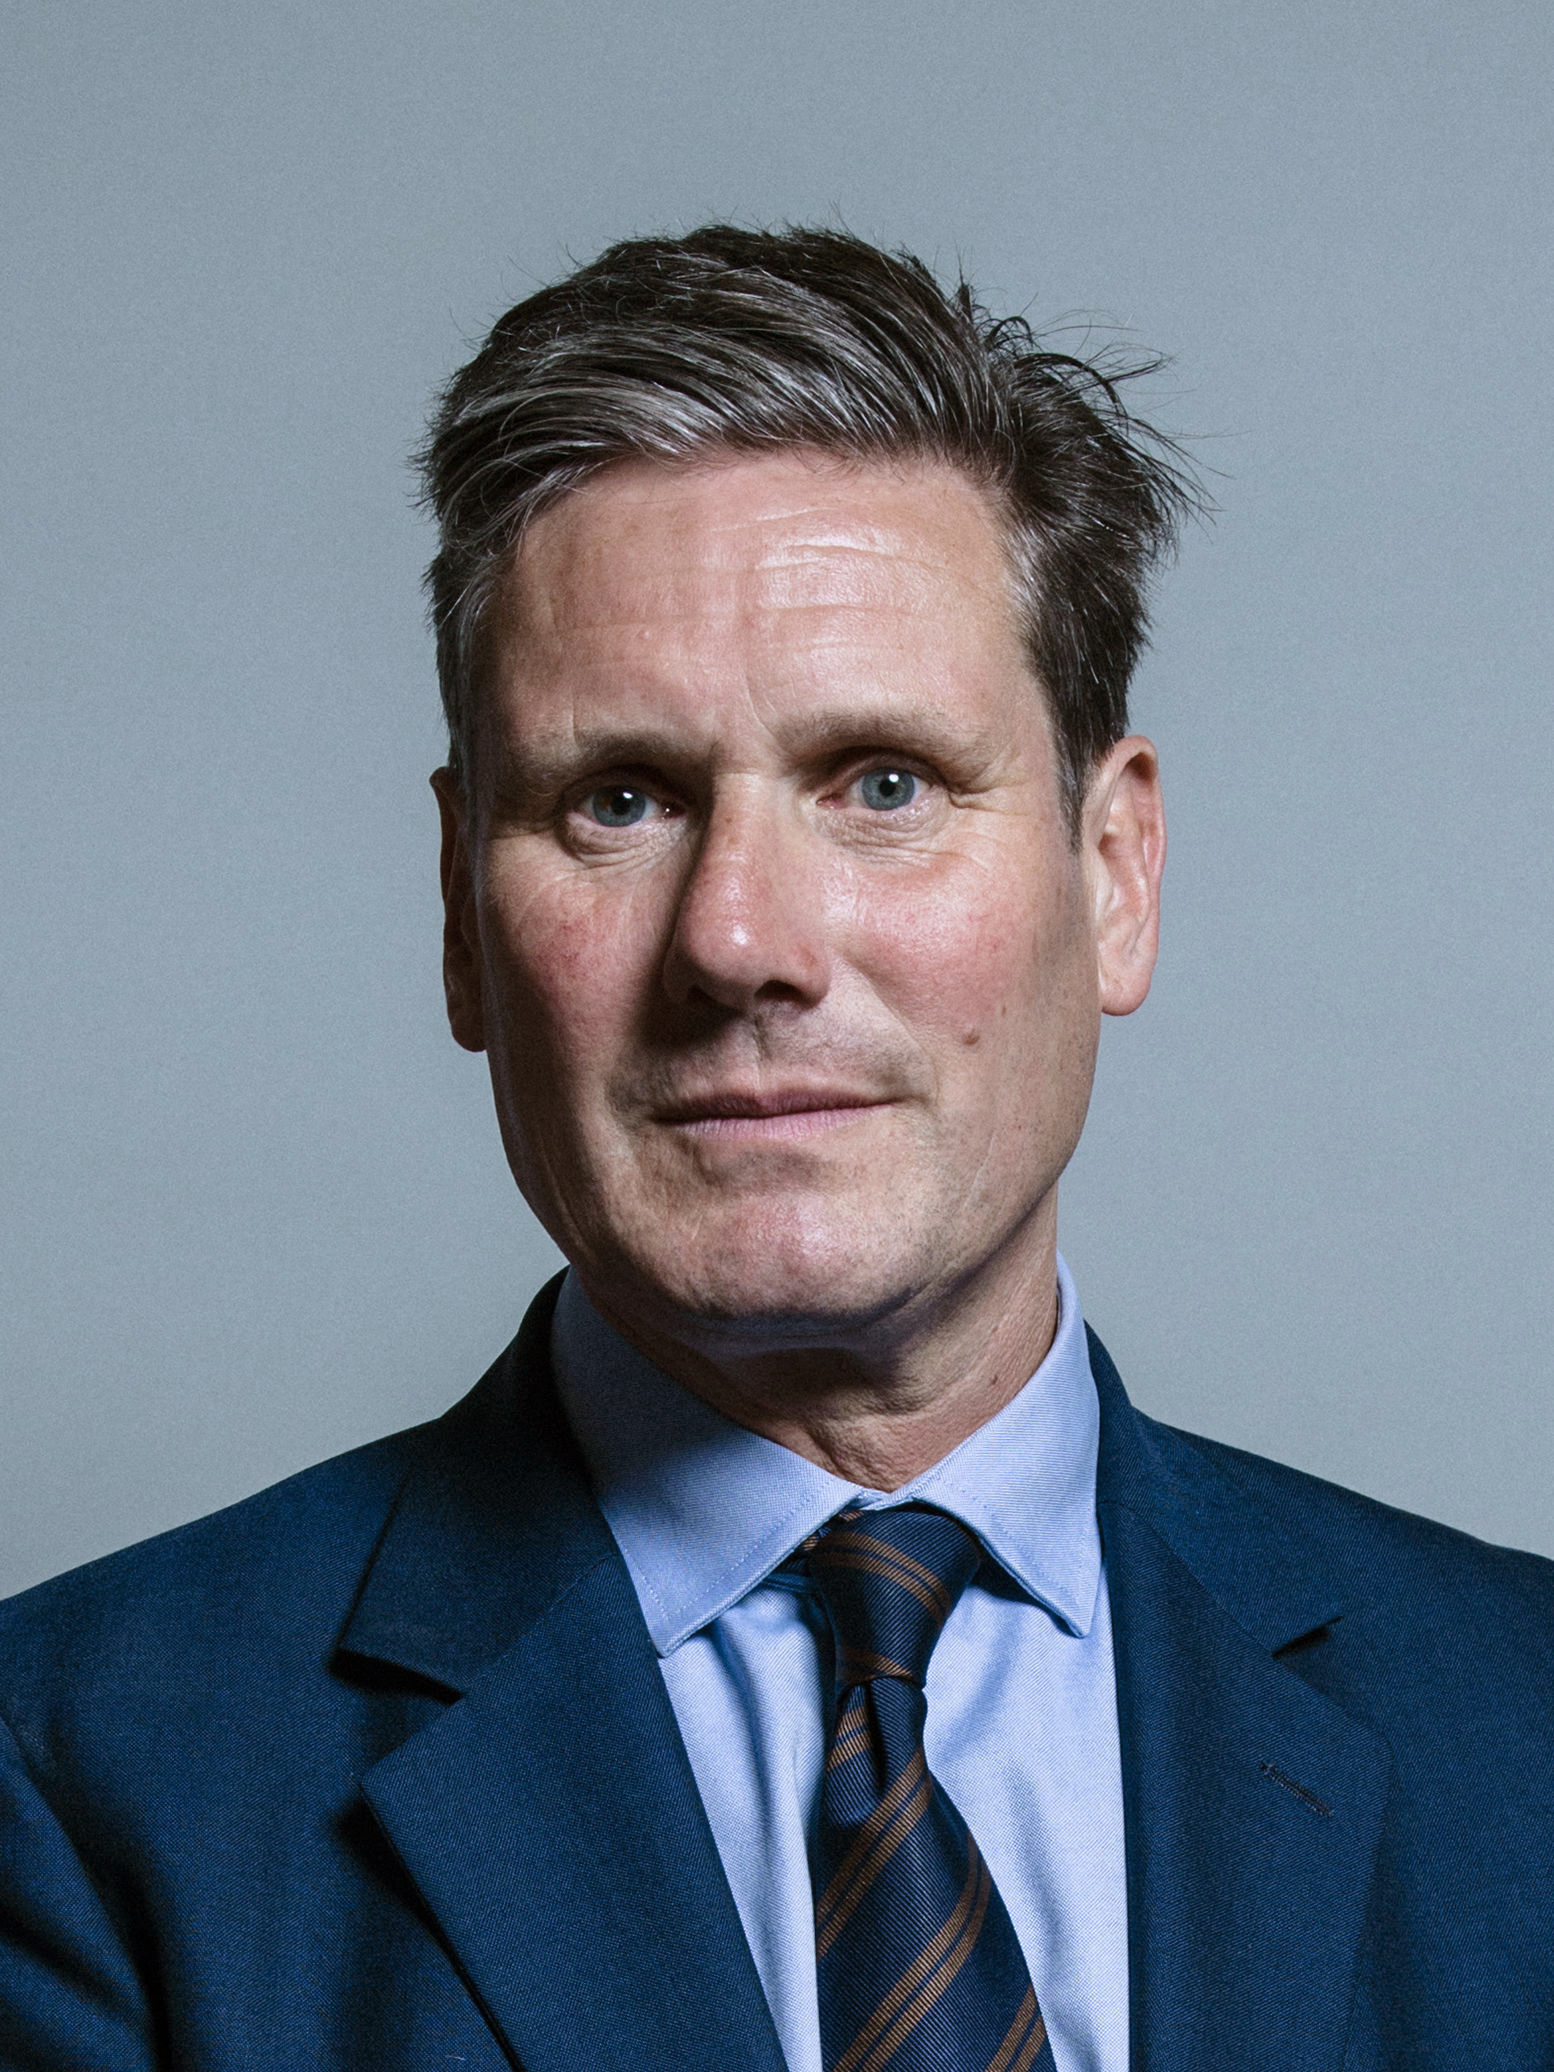 Image of keir starmer looking at the screen. it is a headshot